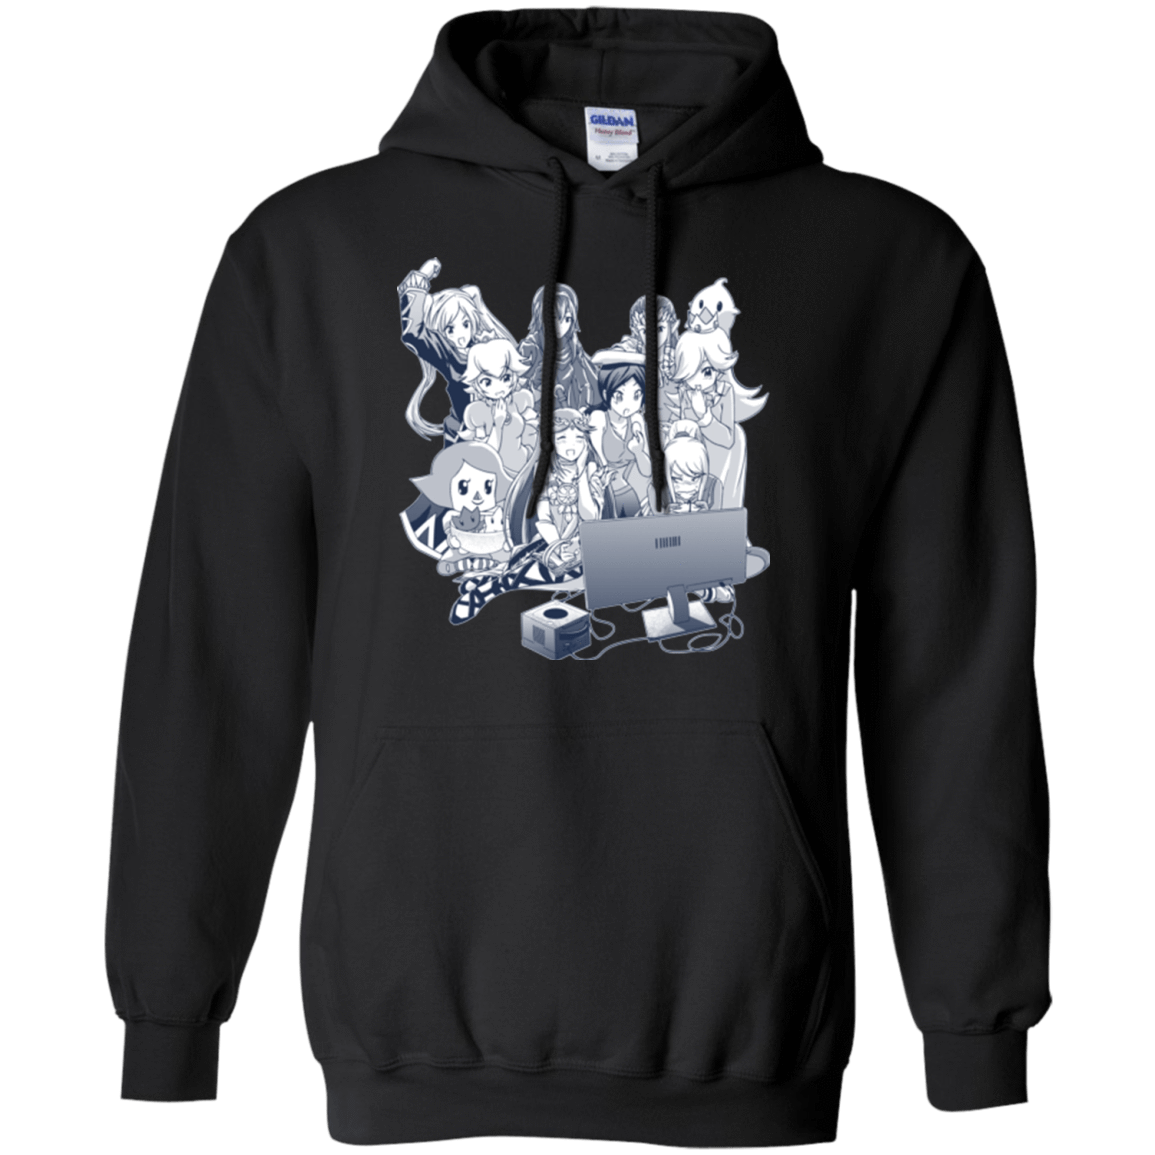 Sweatshirts Black / Small Girls Night Out Pullover Hoodie